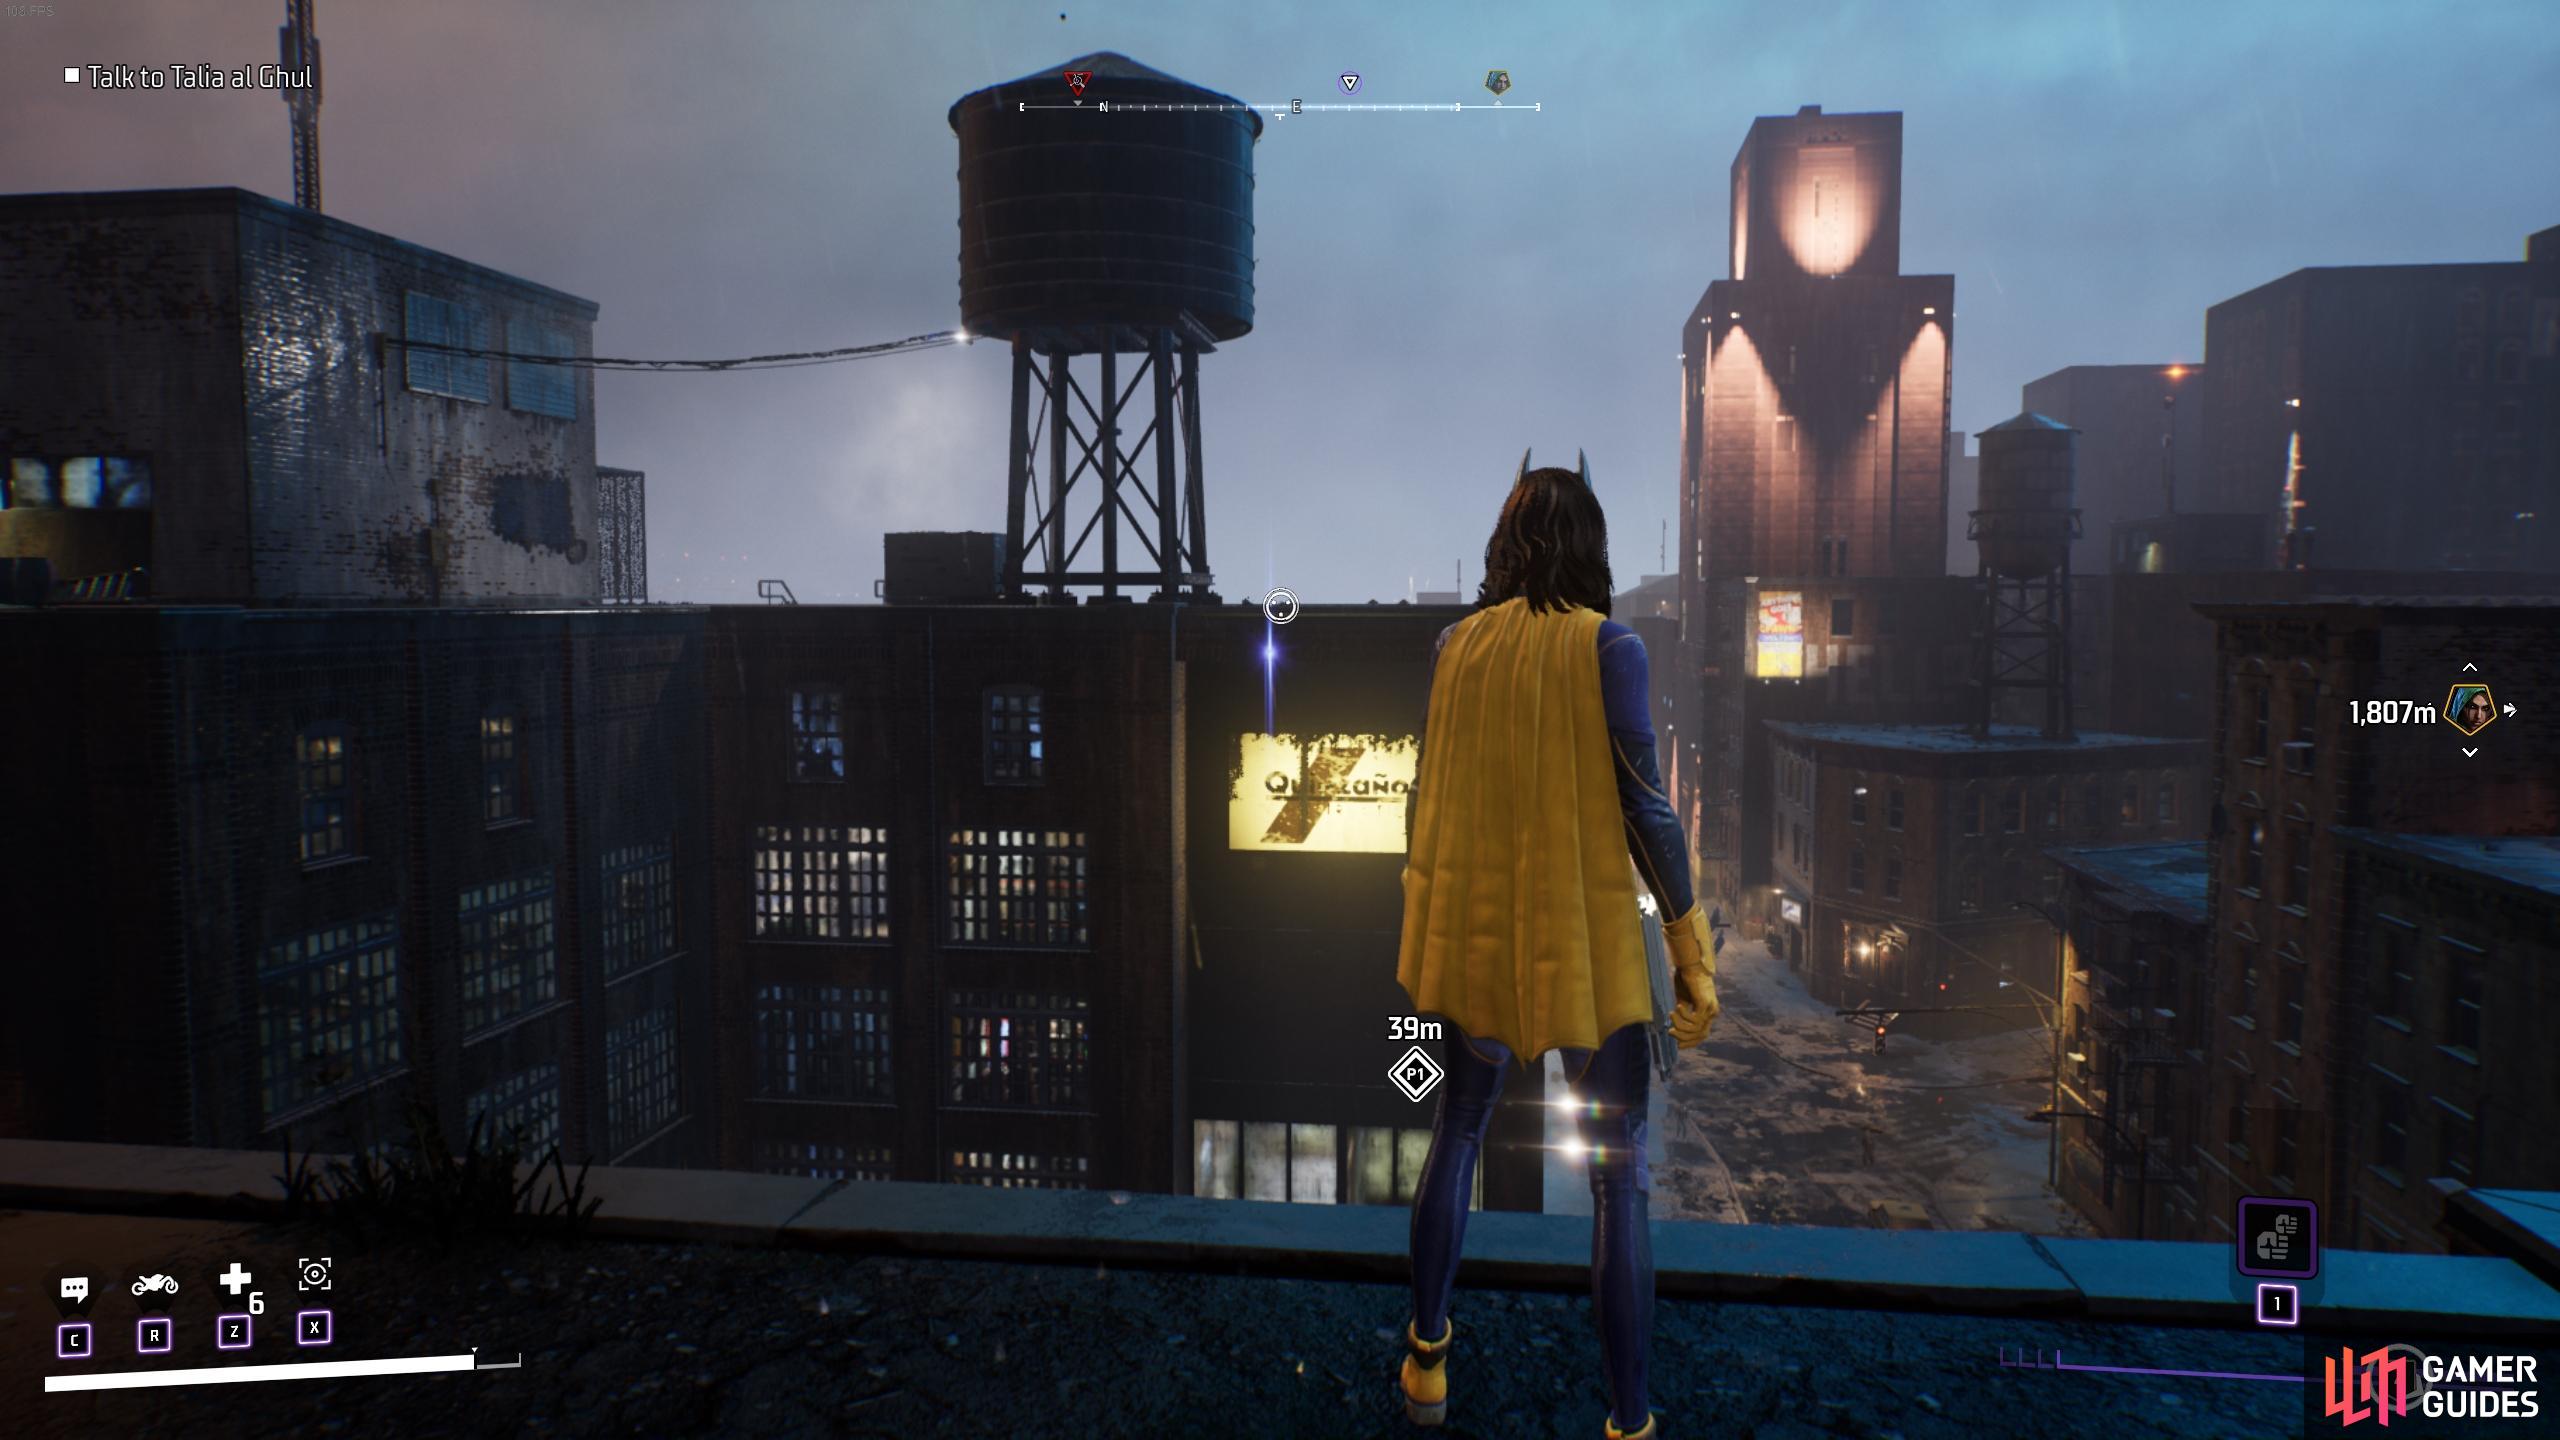 You can obtain this Batarang by dropping down from the top of the building.